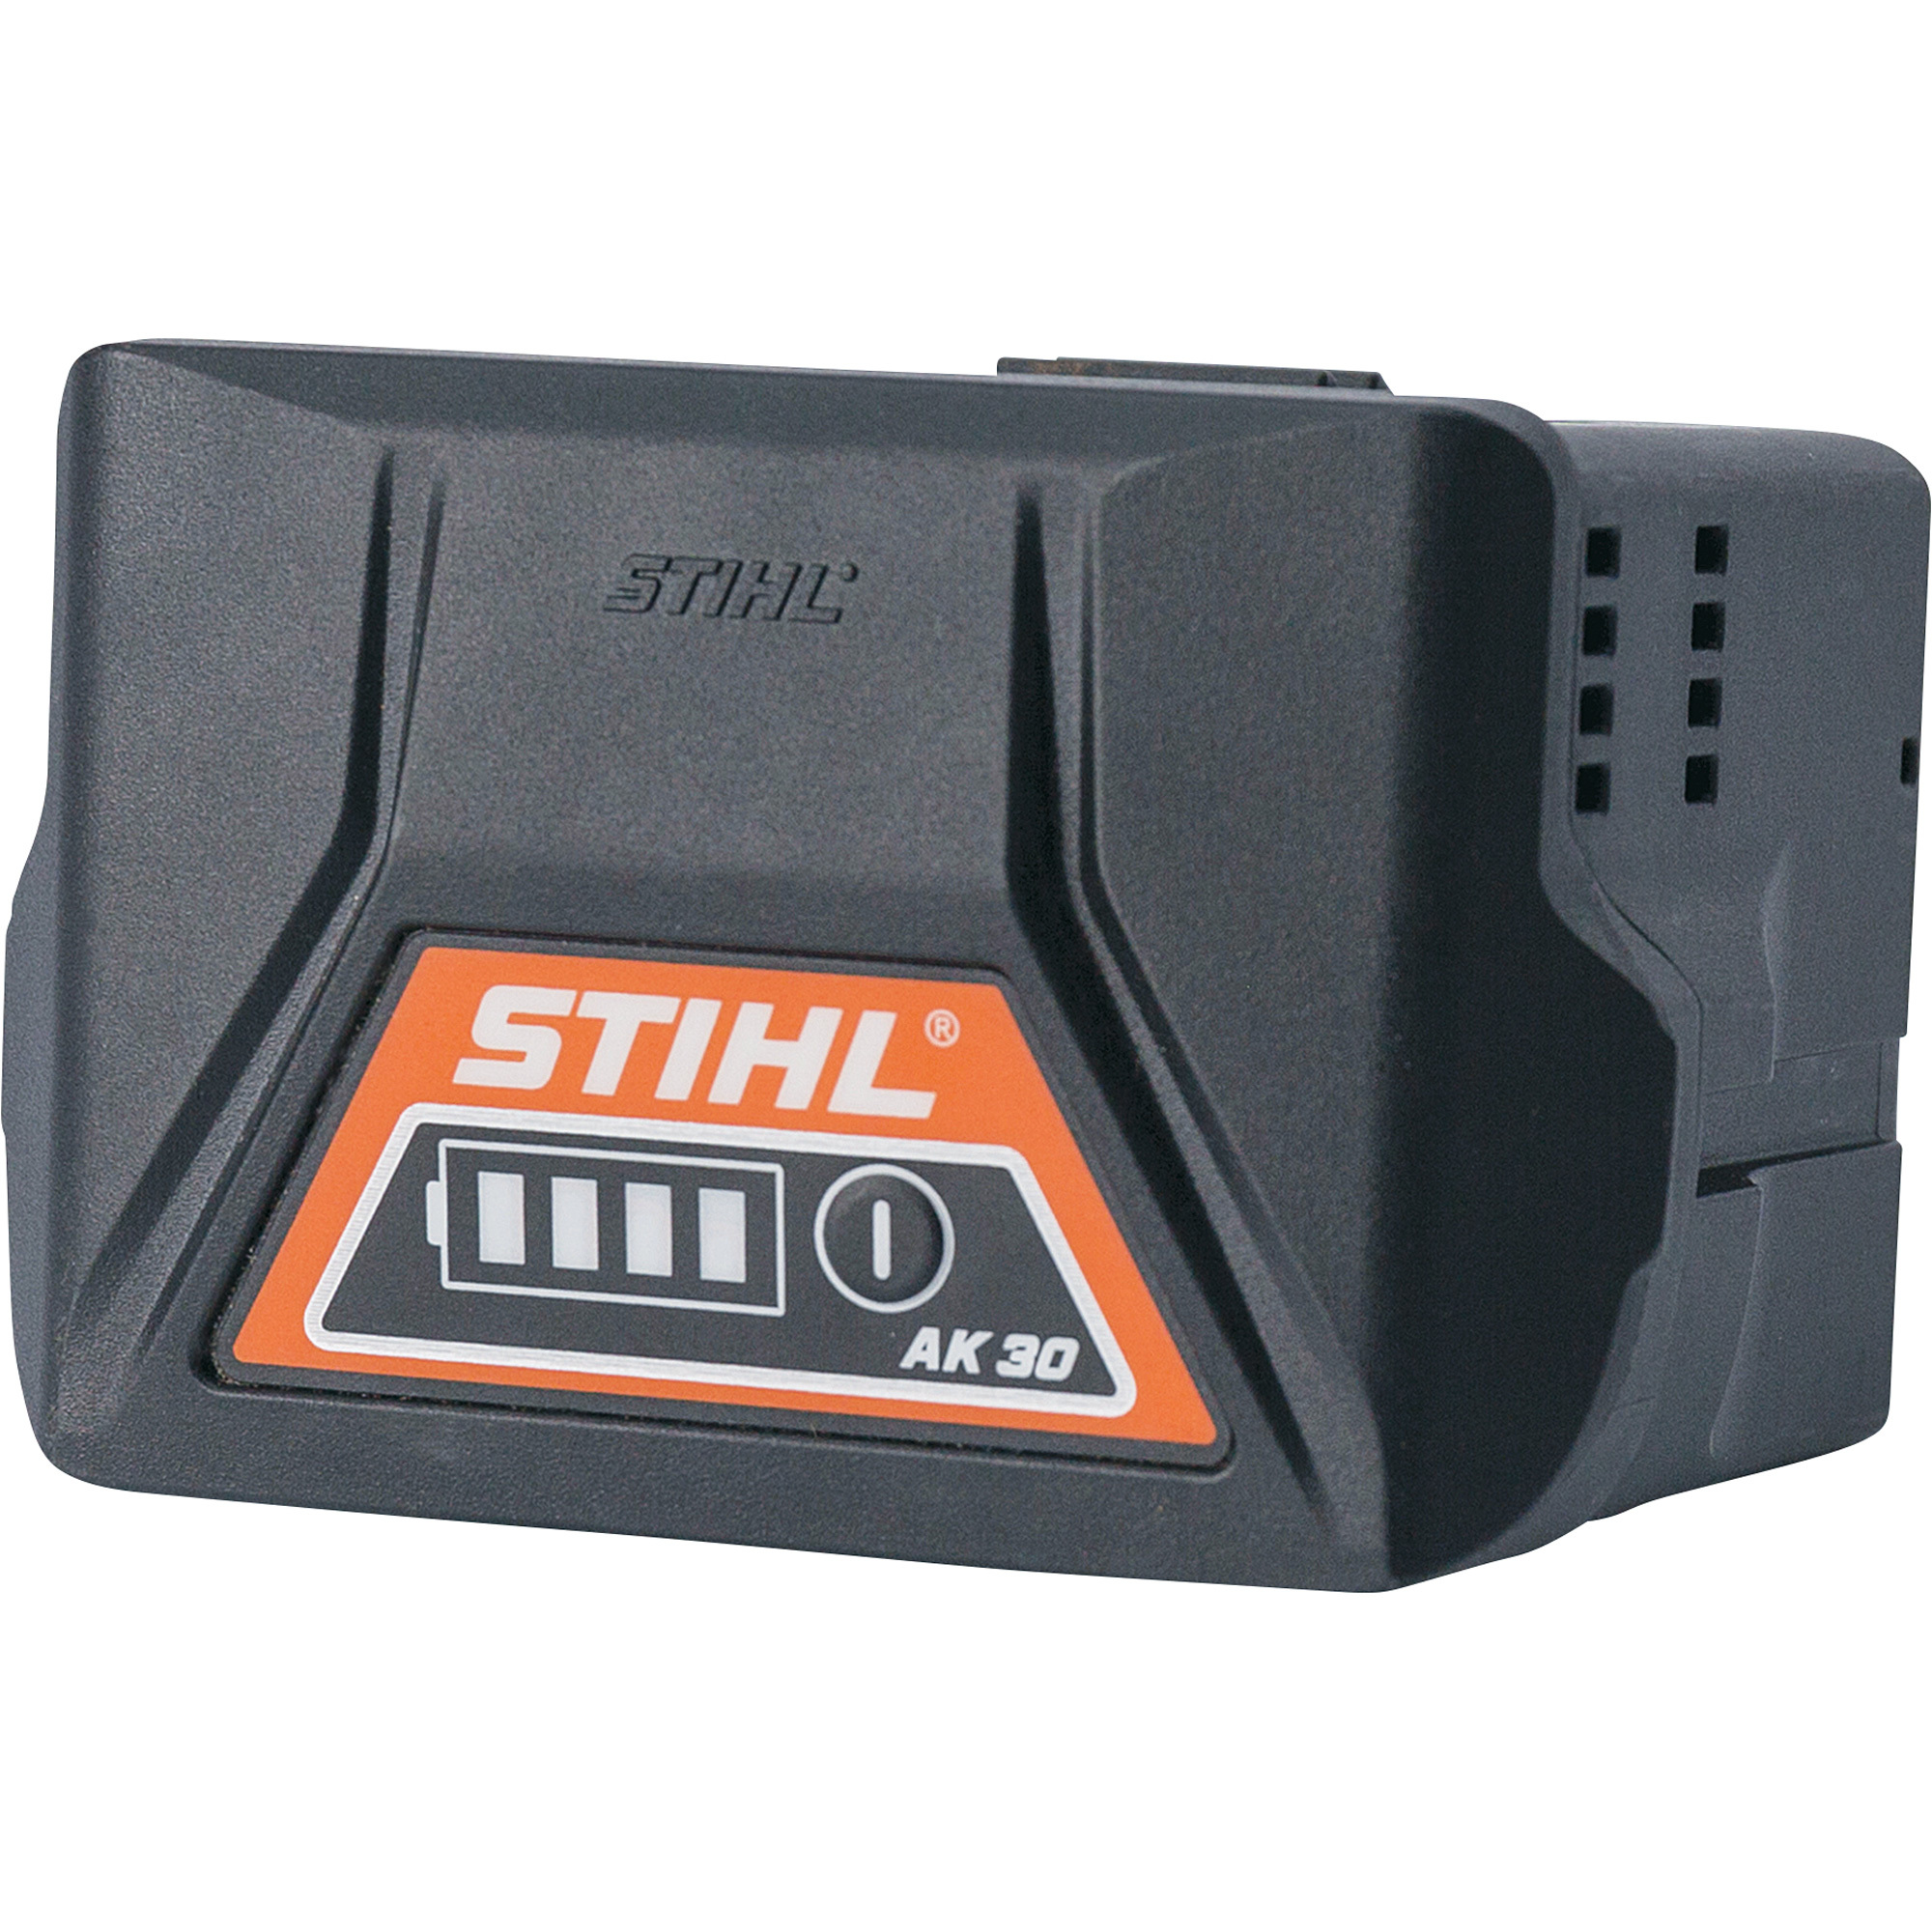 Stihl Battery-Operated AK Series Lithium-Ion Battery â 36V, 4.8 Ah, Model AK 30